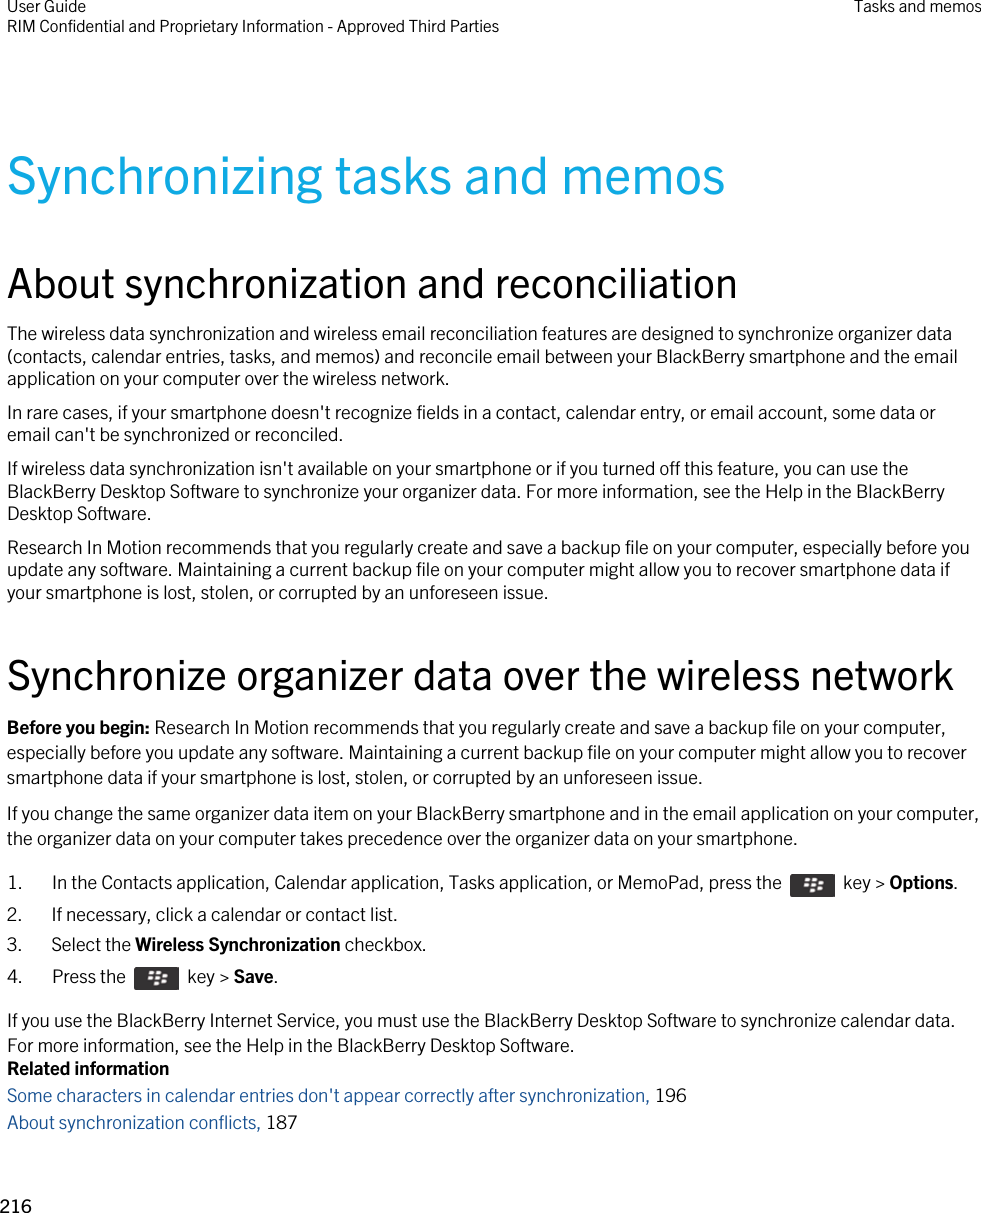 Synchronizing tasks and memosAbout synchronization and reconciliationThe wireless data synchronization and wireless email reconciliation features are designed to synchronize organizer data (contacts, calendar entries, tasks, and memos) and reconcile email between your BlackBerry smartphone and the email application on your computer over the wireless network.In rare cases, if your smartphone doesn&apos;t recognize fields in a contact, calendar entry, or email account, some data or email can&apos;t be synchronized or reconciled.If wireless data synchronization isn&apos;t available on your smartphone or if you turned off this feature, you can use the BlackBerry Desktop Software to synchronize your organizer data. For more information, see the Help in the BlackBerry Desktop Software.Research In Motion recommends that you regularly create and save a backup file on your computer, especially before you update any software. Maintaining a current backup file on your computer might allow you to recover smartphone data if your smartphone is lost, stolen, or corrupted by an unforeseen issue.Synchronize organizer data over the wireless networkBefore you begin: Research In Motion recommends that you regularly create and save a backup file on your computer, especially before you update any software. Maintaining a current backup file on your computer might allow you to recover smartphone data if your smartphone is lost, stolen, or corrupted by an unforeseen issue.If you change the same organizer data item on your BlackBerry smartphone and in the email application on your computer, the organizer data on your computer takes precedence over the organizer data on your smartphone.1.  In the Contacts application, Calendar application, Tasks application, or MemoPad, press the    key &gt; Options. 2. If necessary, click a calendar or contact list.3. Select the Wireless Synchronization checkbox.4.  Press the    key &gt; Save. If you use the BlackBerry Internet Service, you must use the BlackBerry Desktop Software to synchronize calendar data. For more information, see the Help in the BlackBerry Desktop Software.Related informationSome characters in calendar entries don&apos;t appear correctly after synchronization, 196 About synchronization conflicts, 187 User GuideRIM Confidential and Proprietary Information - Approved Third Parties Tasks and memos216 